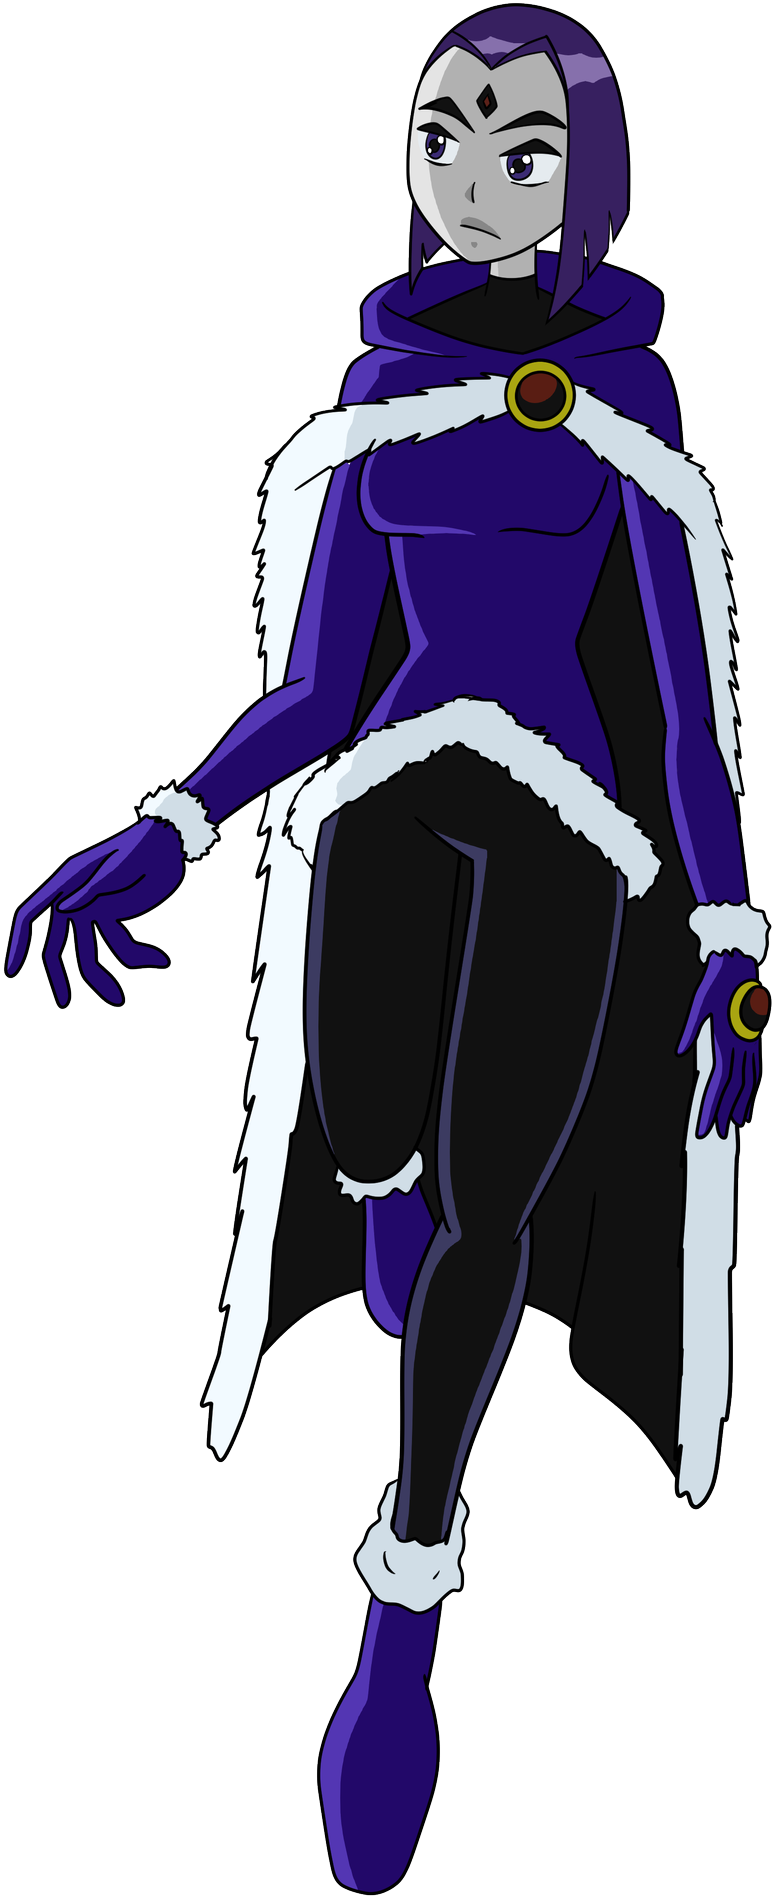 Cartoon Of A Woman In A Purple Outfit